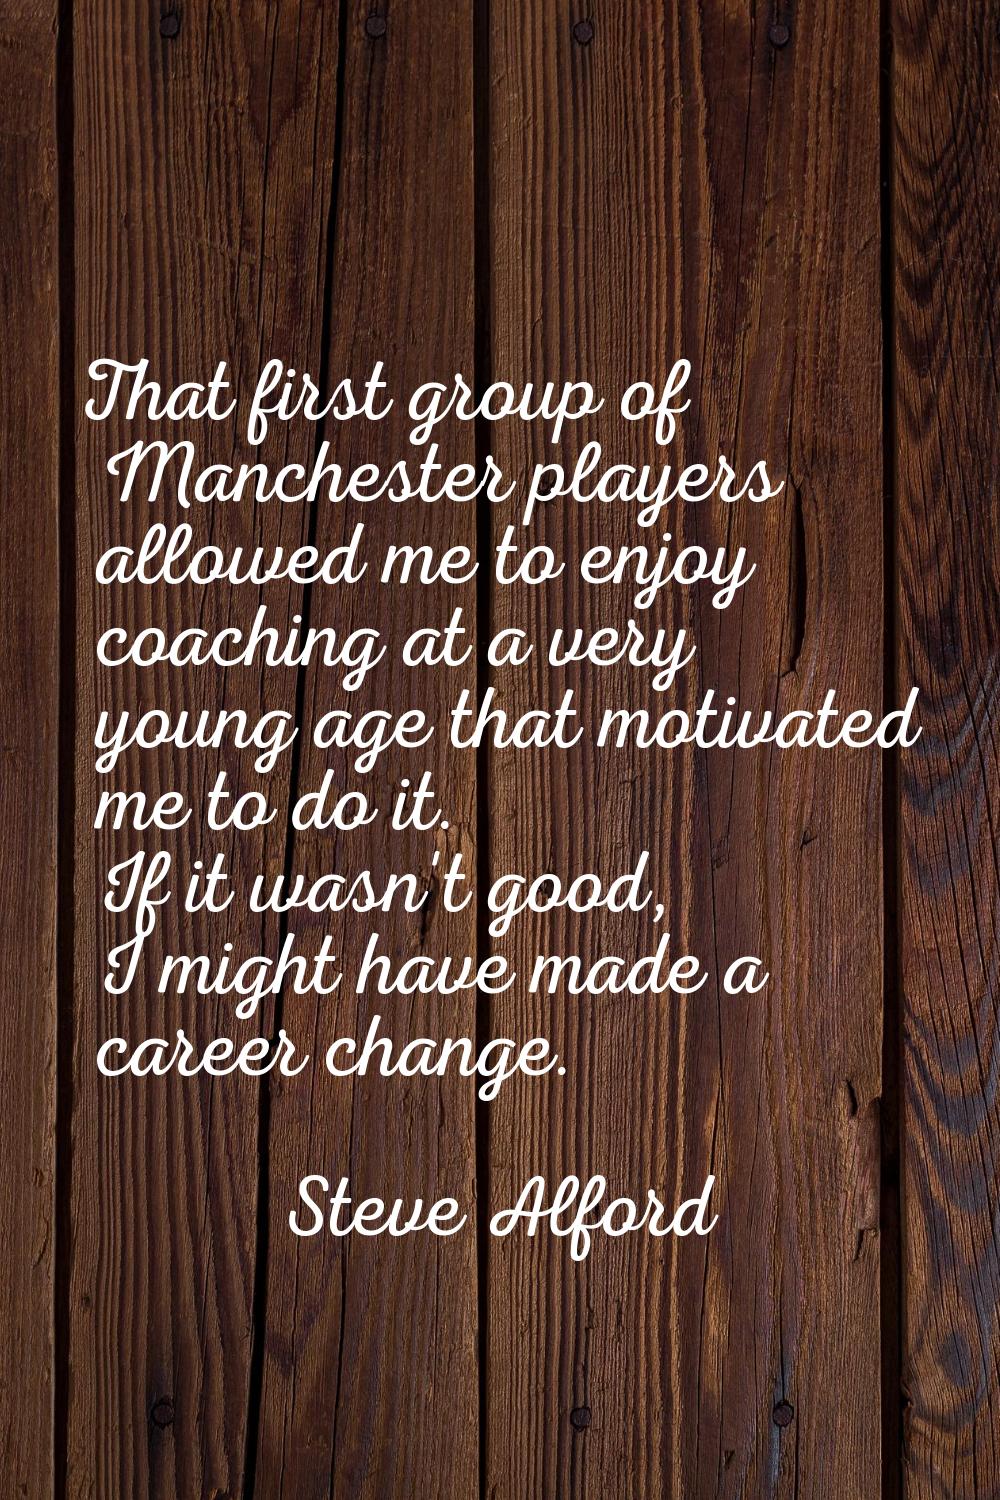 That first group of Manchester players allowed me to enjoy coaching at a very young age that motiva